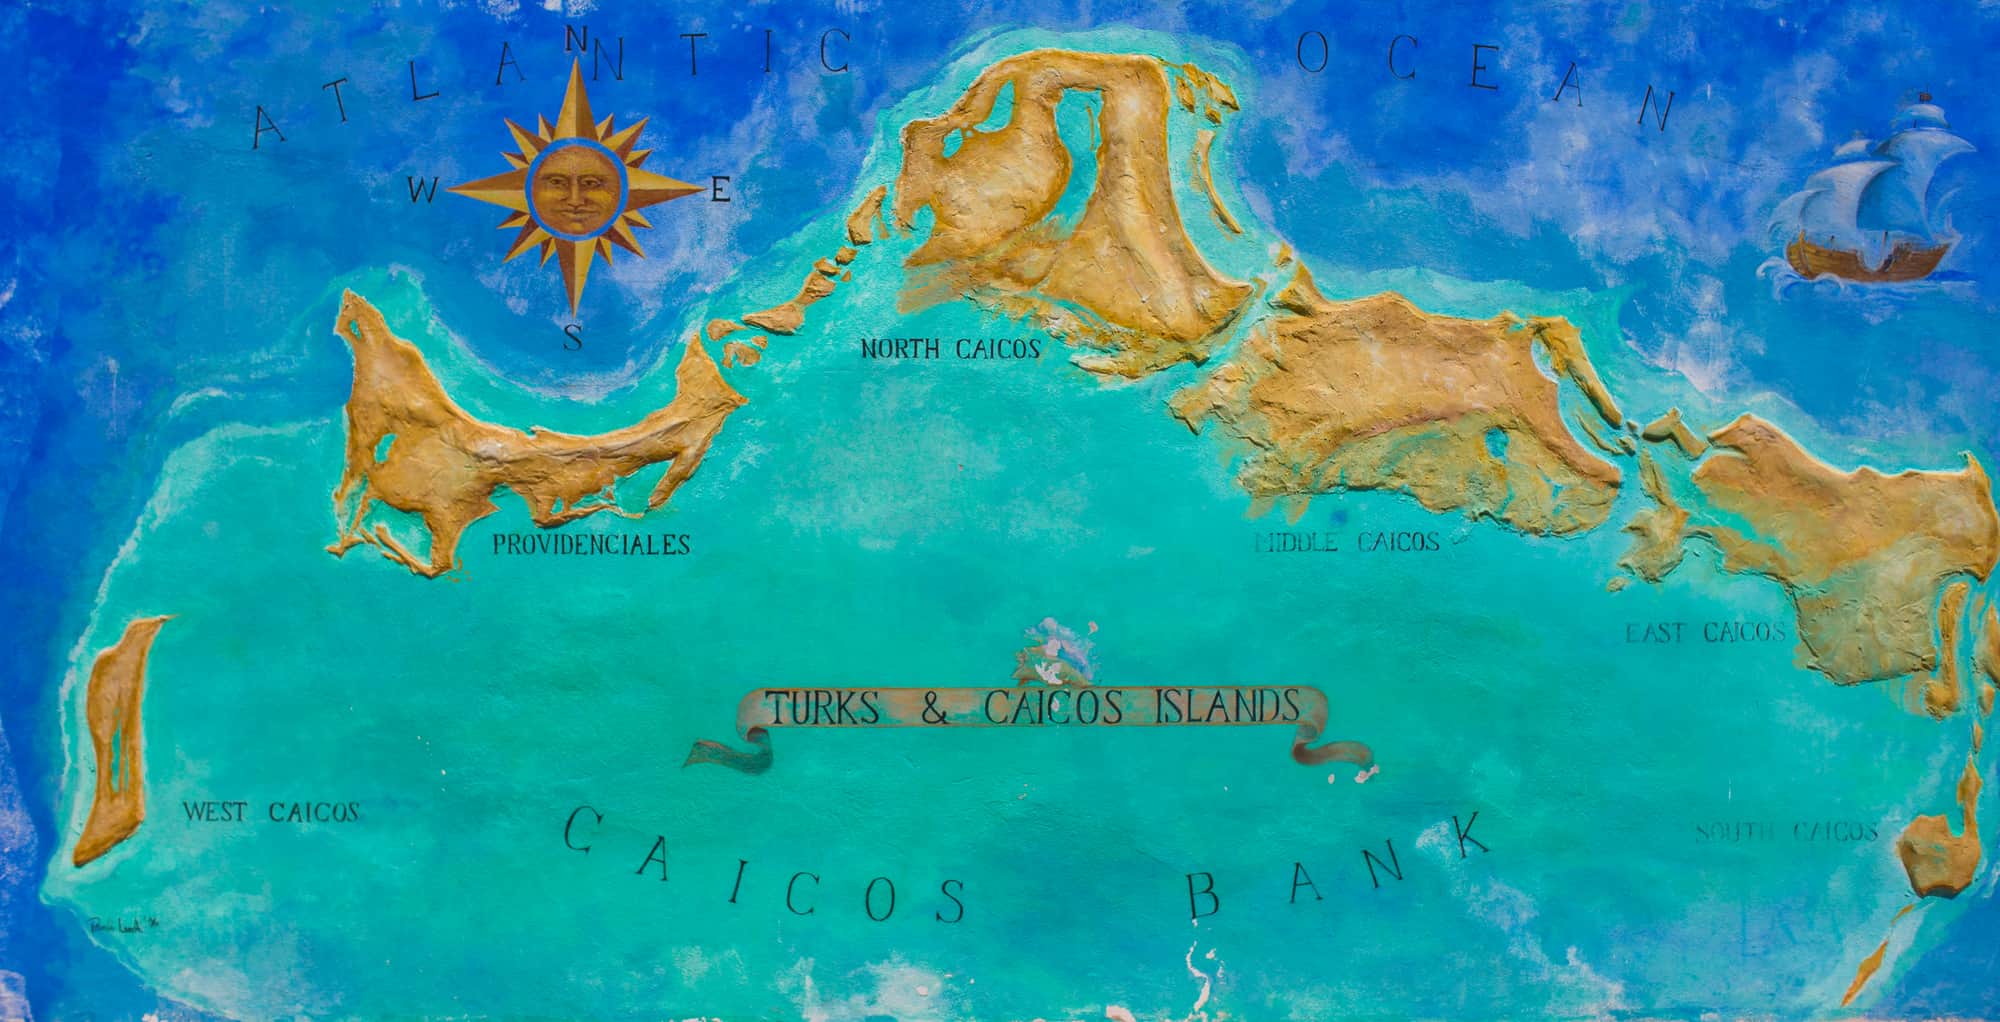 A map of Turks and Caicos